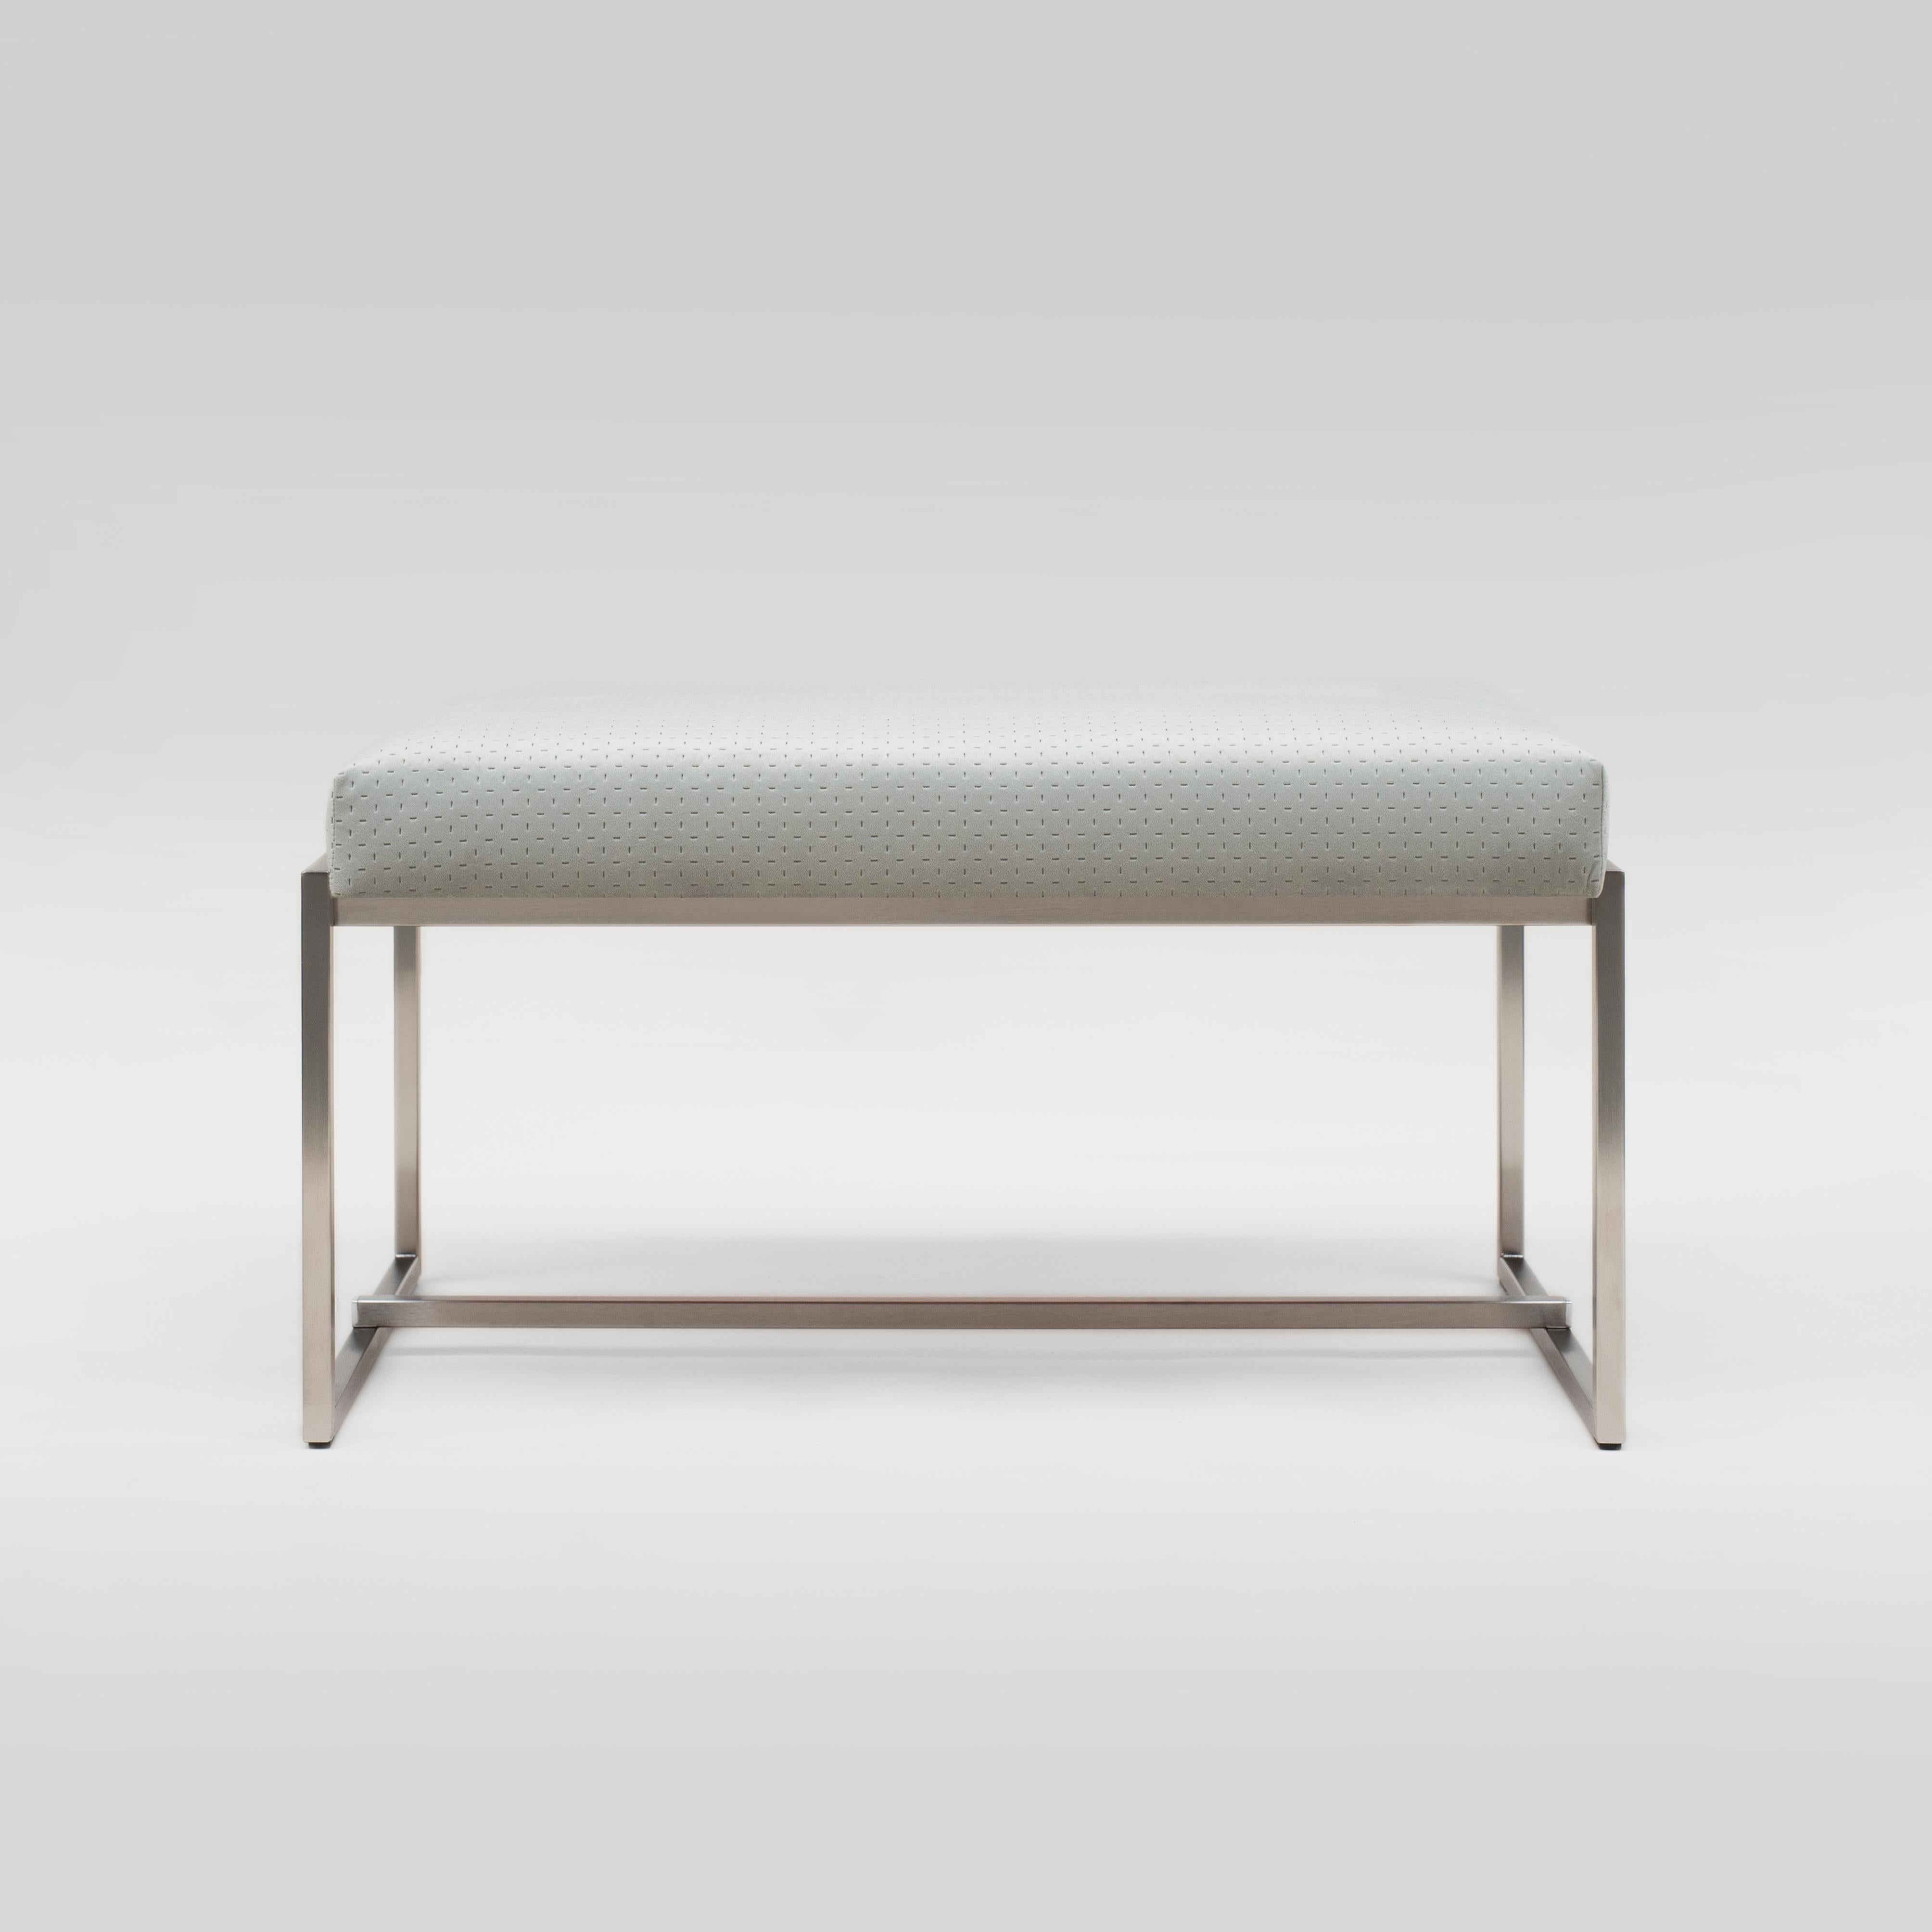 Bench designed by Peter Ghyczy in 2016.
Manufactured by Ghyczy (Netherlands)

Upholstered bench on a slender metal frame. A light weight construction, easy to pick up and move, can be used as footrest or bed-end.

Material and color:
Frame Stainless